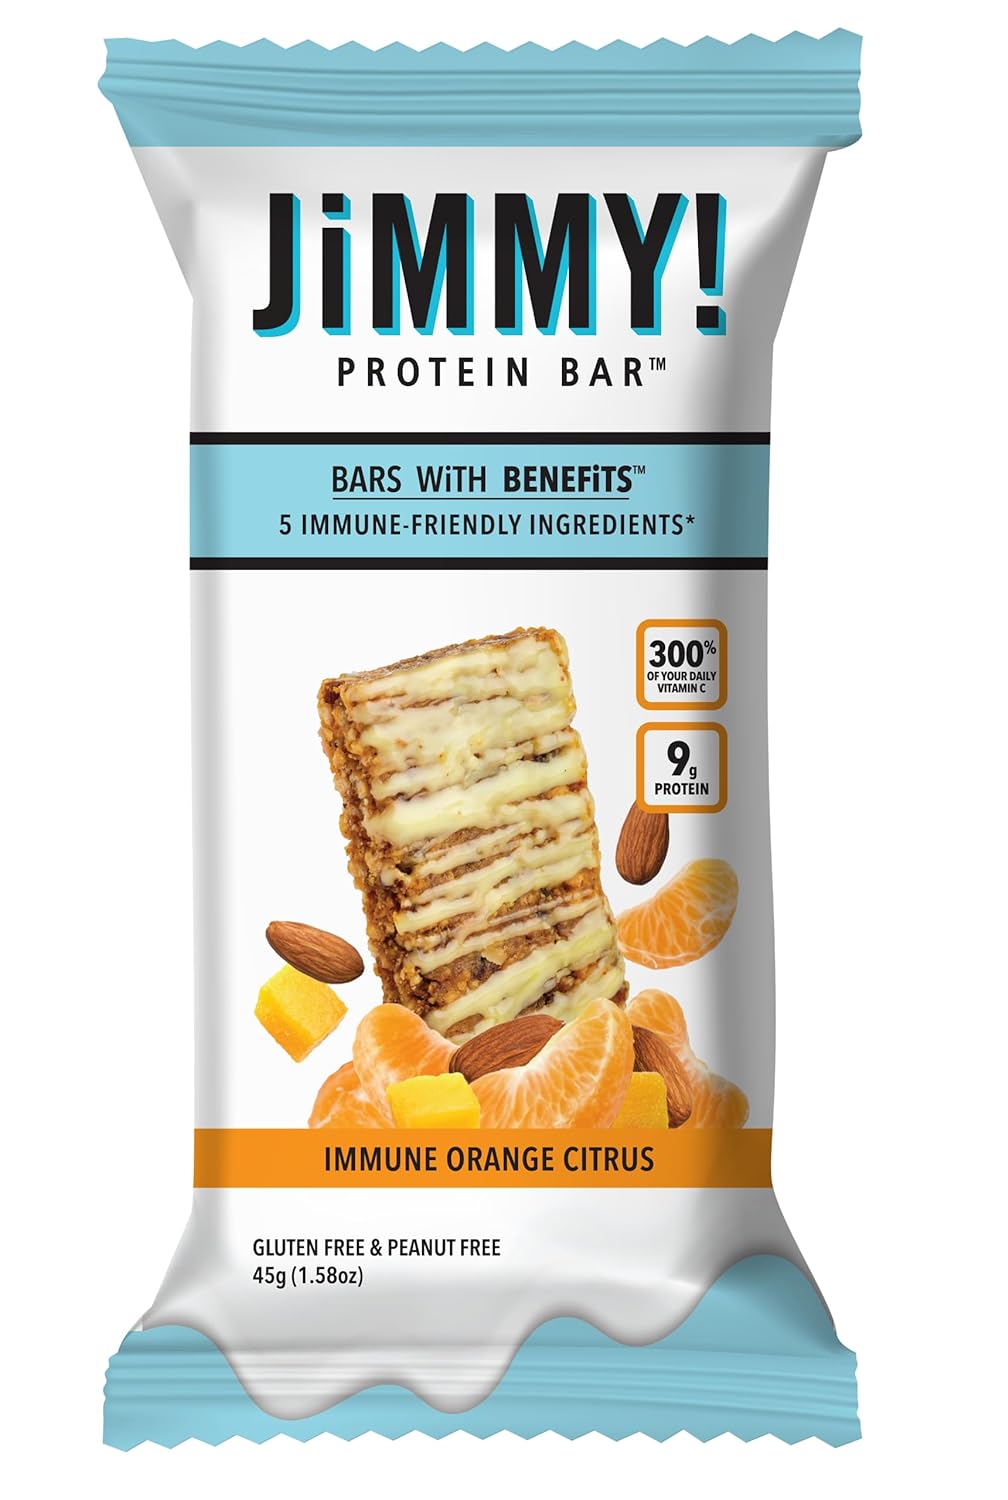 JiMMY! Protein Bar, Orange Citrus, Immune Support, 15 Count - Energy B1.96 Pounds